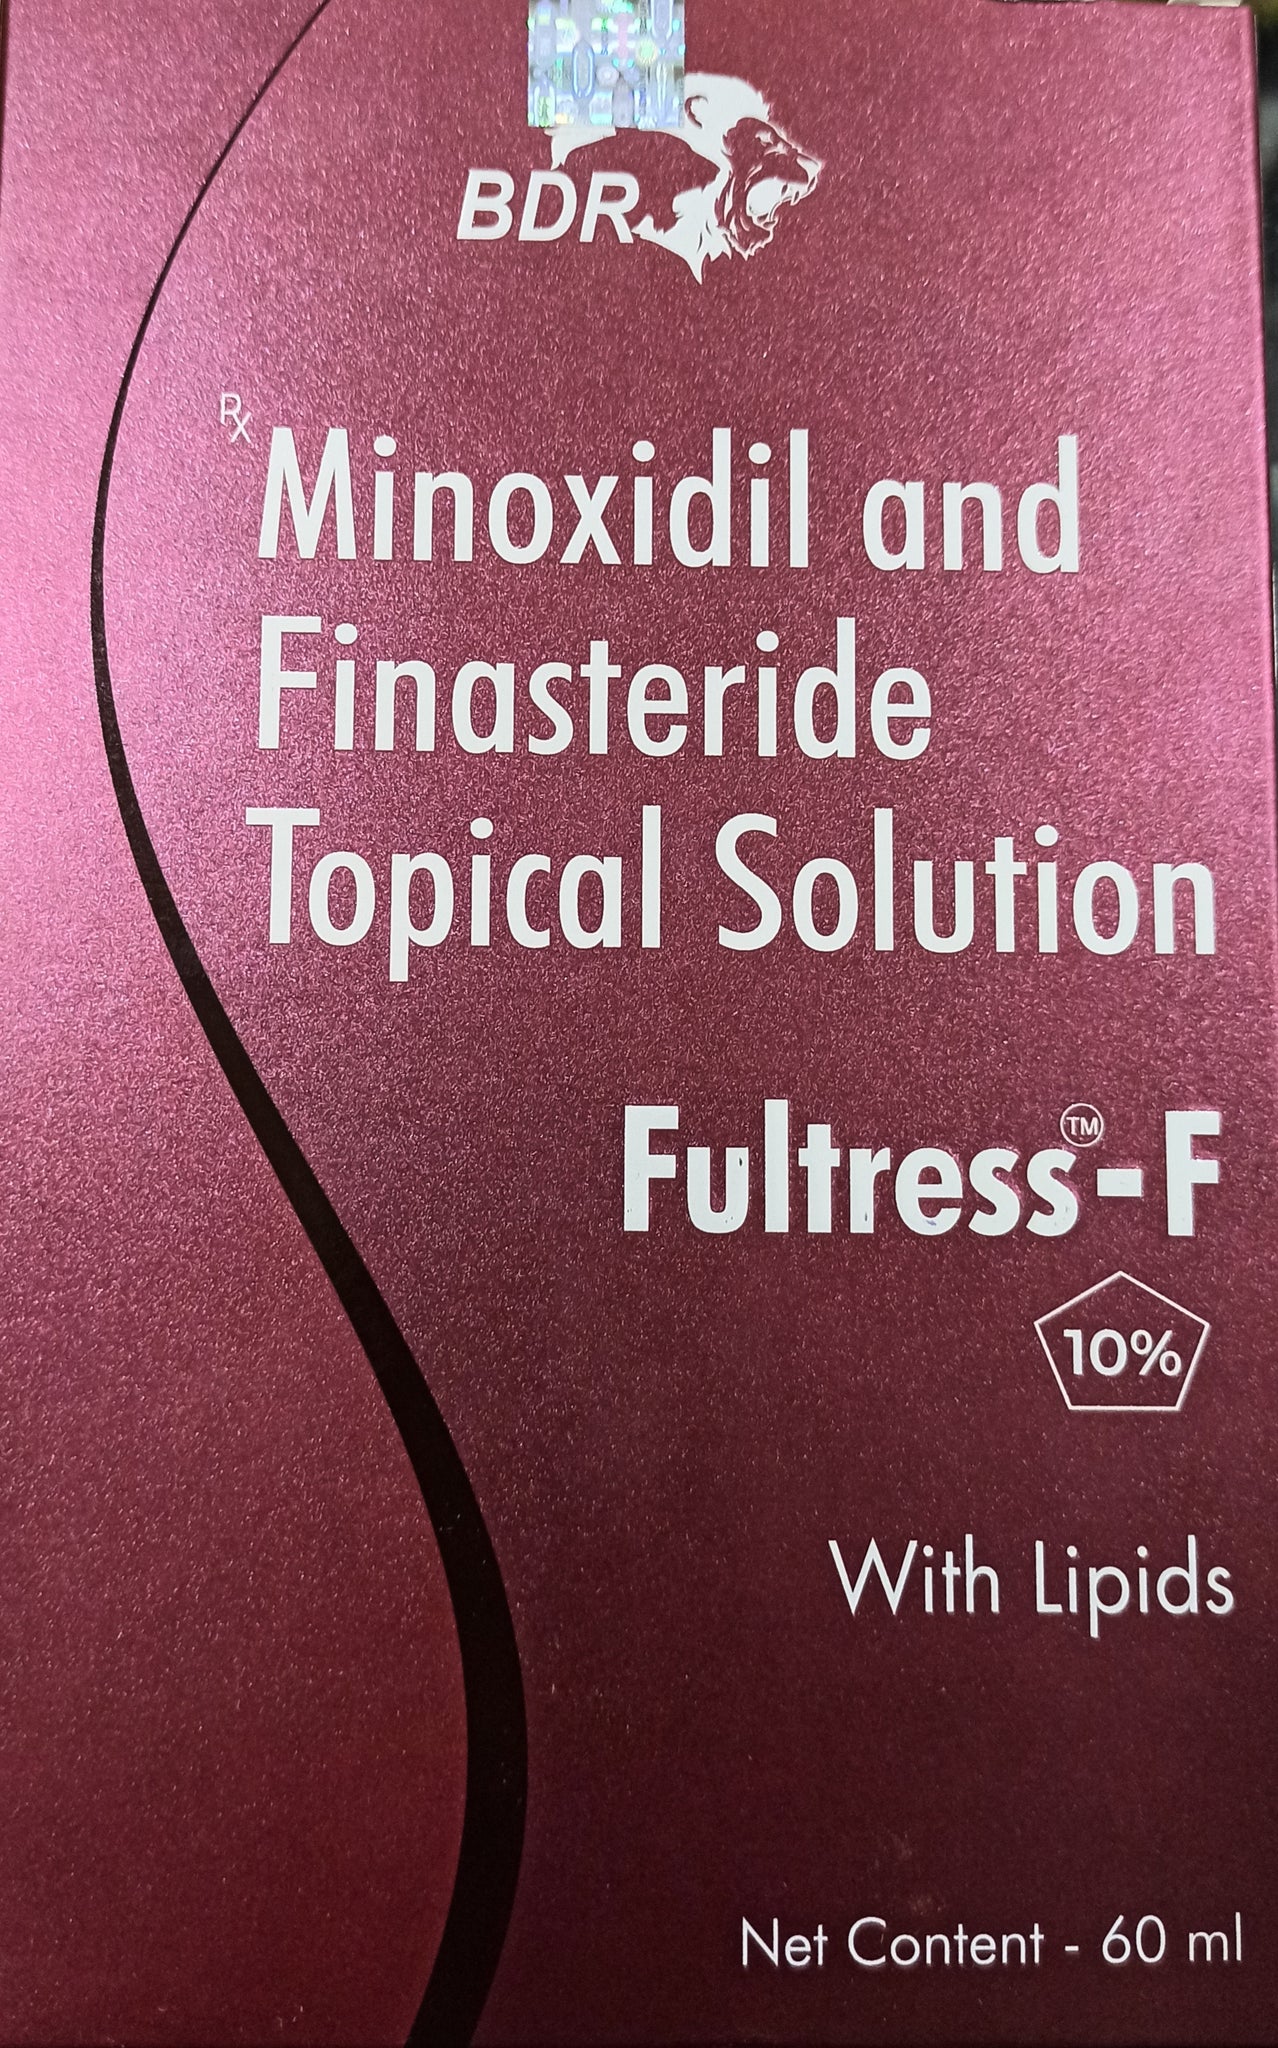 fultress F 10 topical solution (60ml) for hair loss and hair regrowth